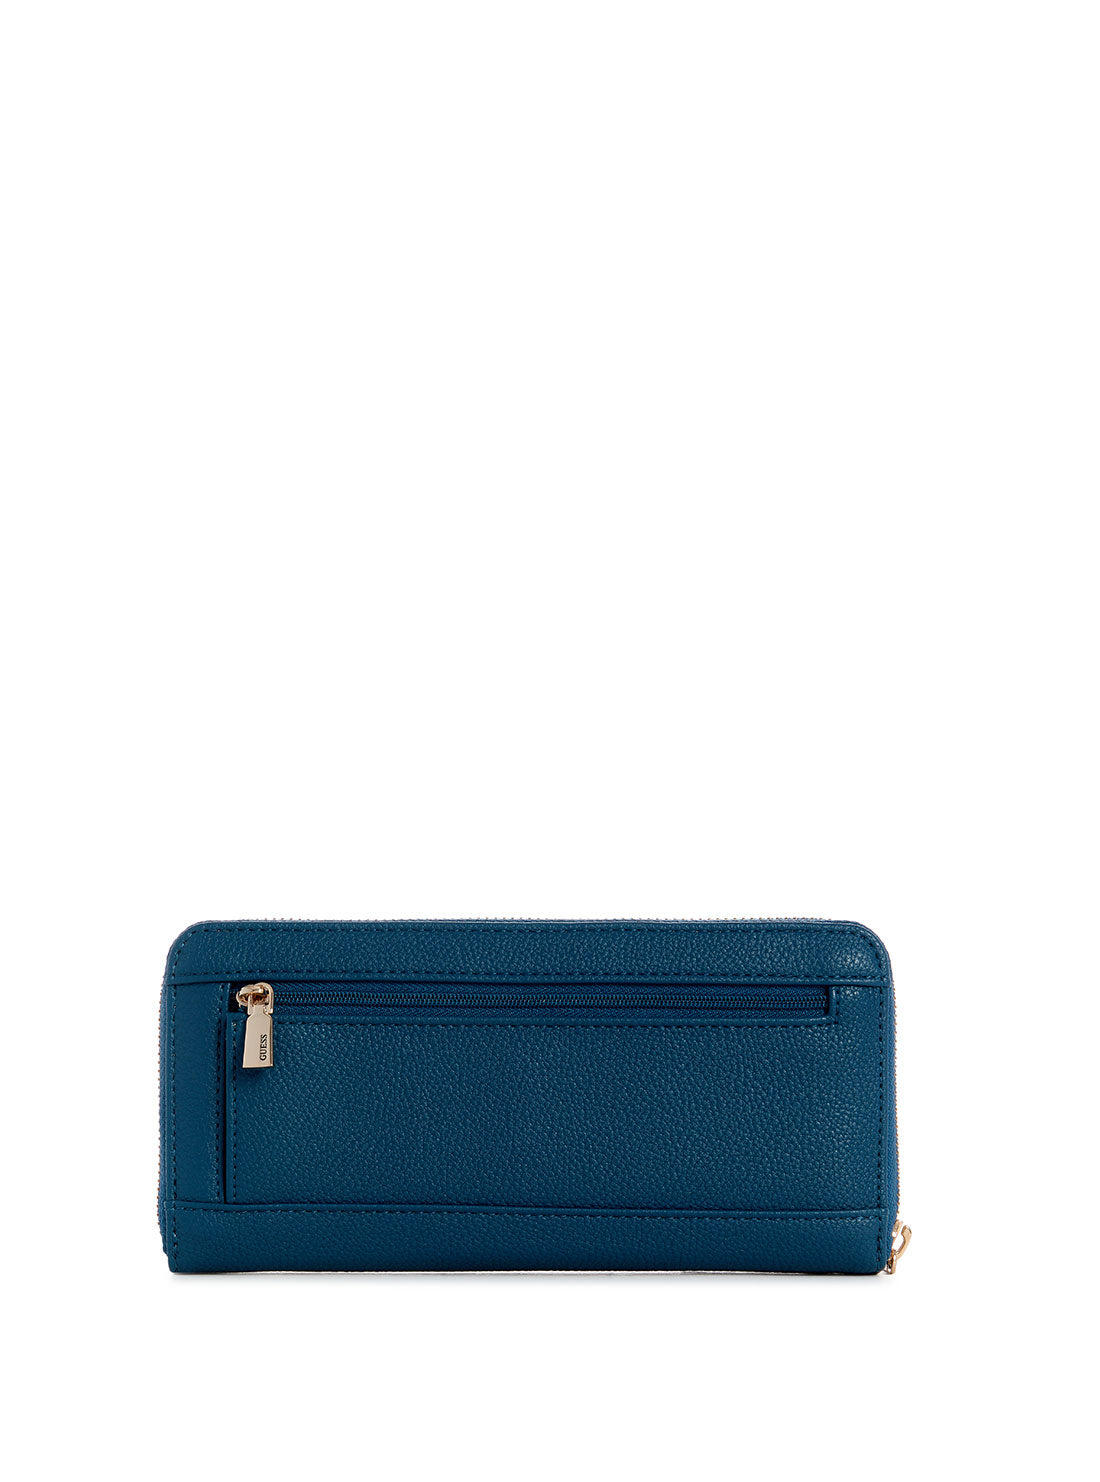 GUESS Blue Meridian Large Wallet back view